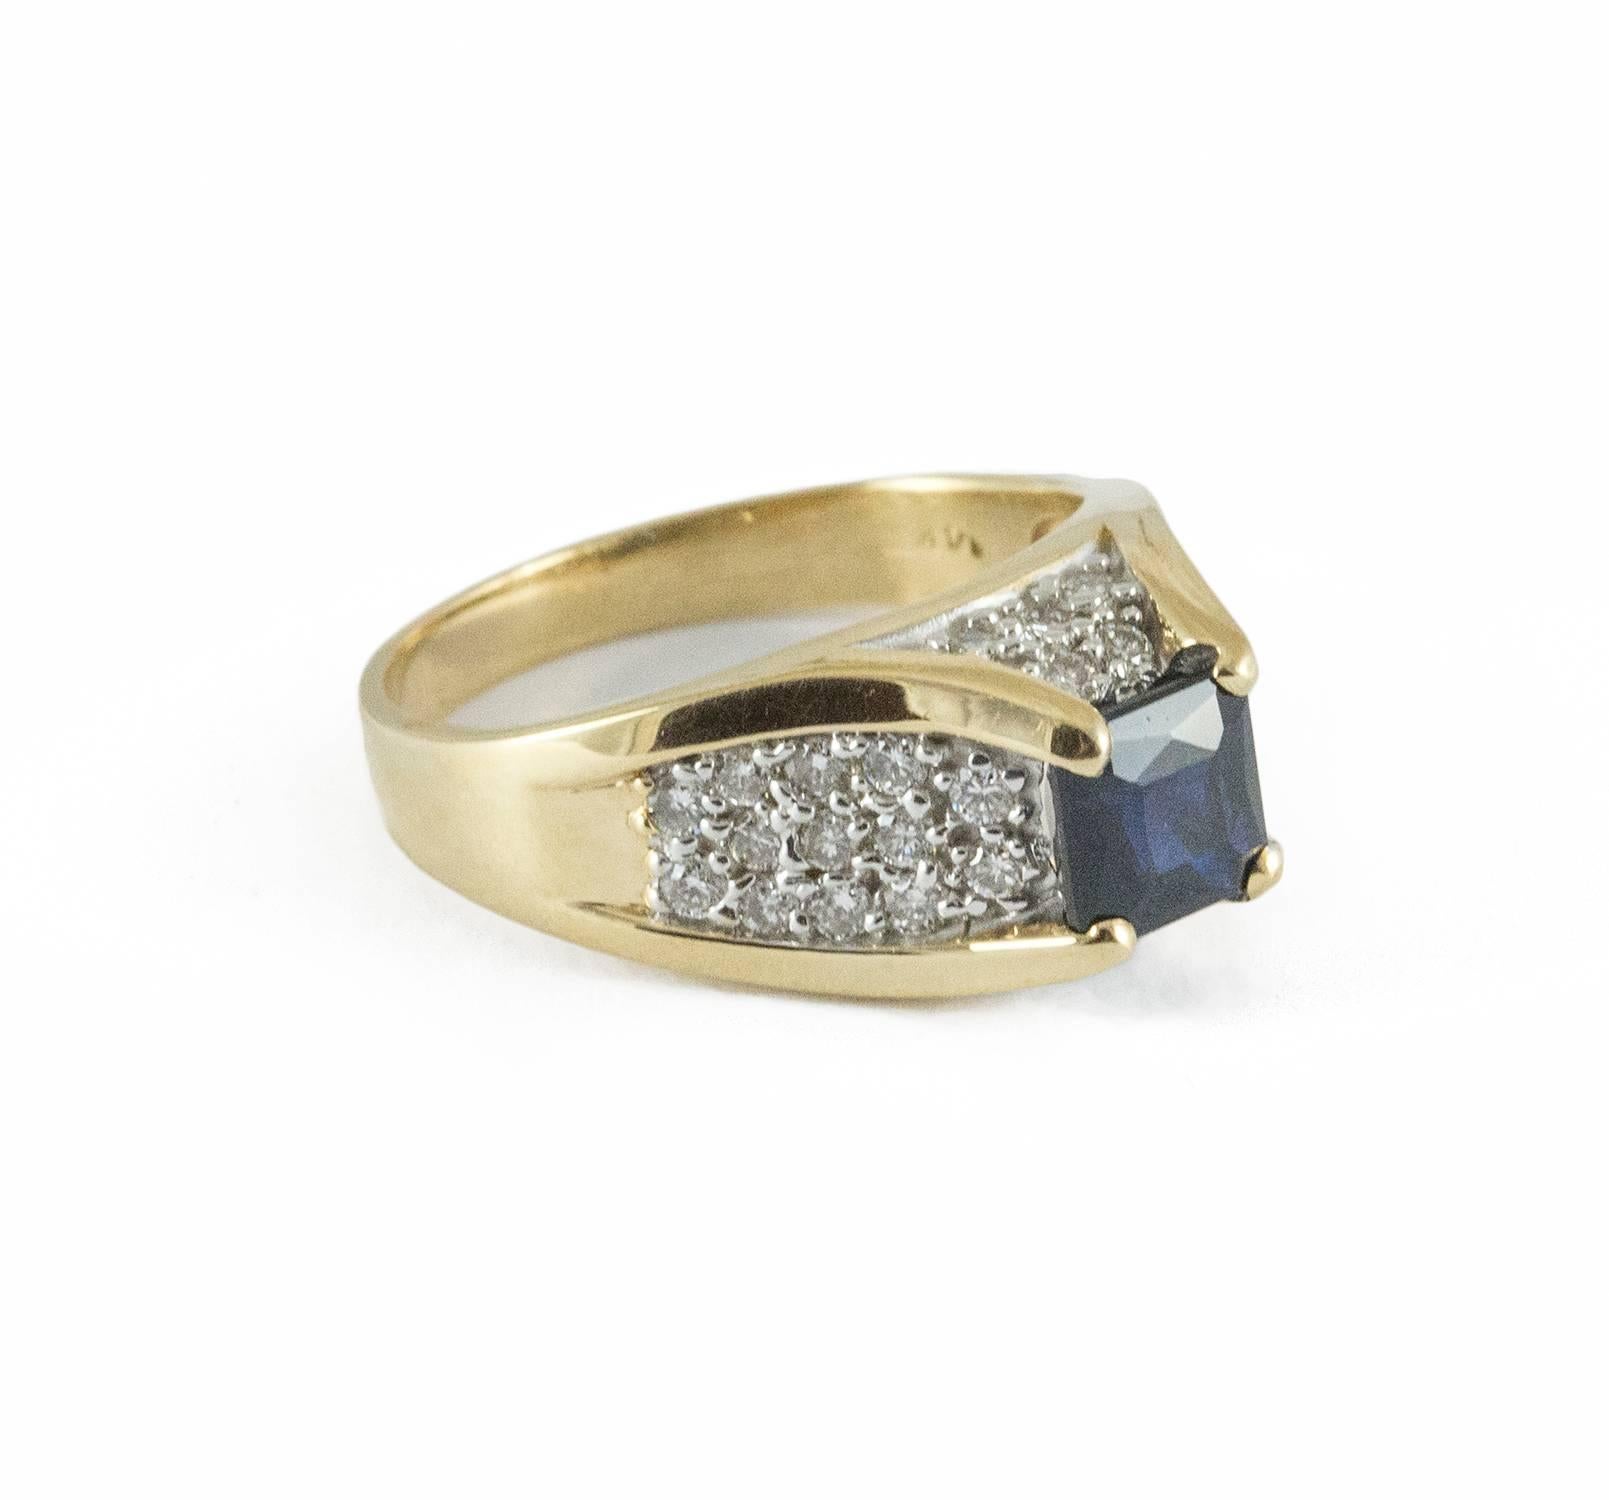 A bold vintage ring with a central square cut dark toned sapphire weighing 1.5 ct. Enhancing the central stone are 36 round brilliant cut diamonds weighing .62 ct. (SI-I1,G-H). The mount is 14kt yellow gold and the sapphire sits dramatically above